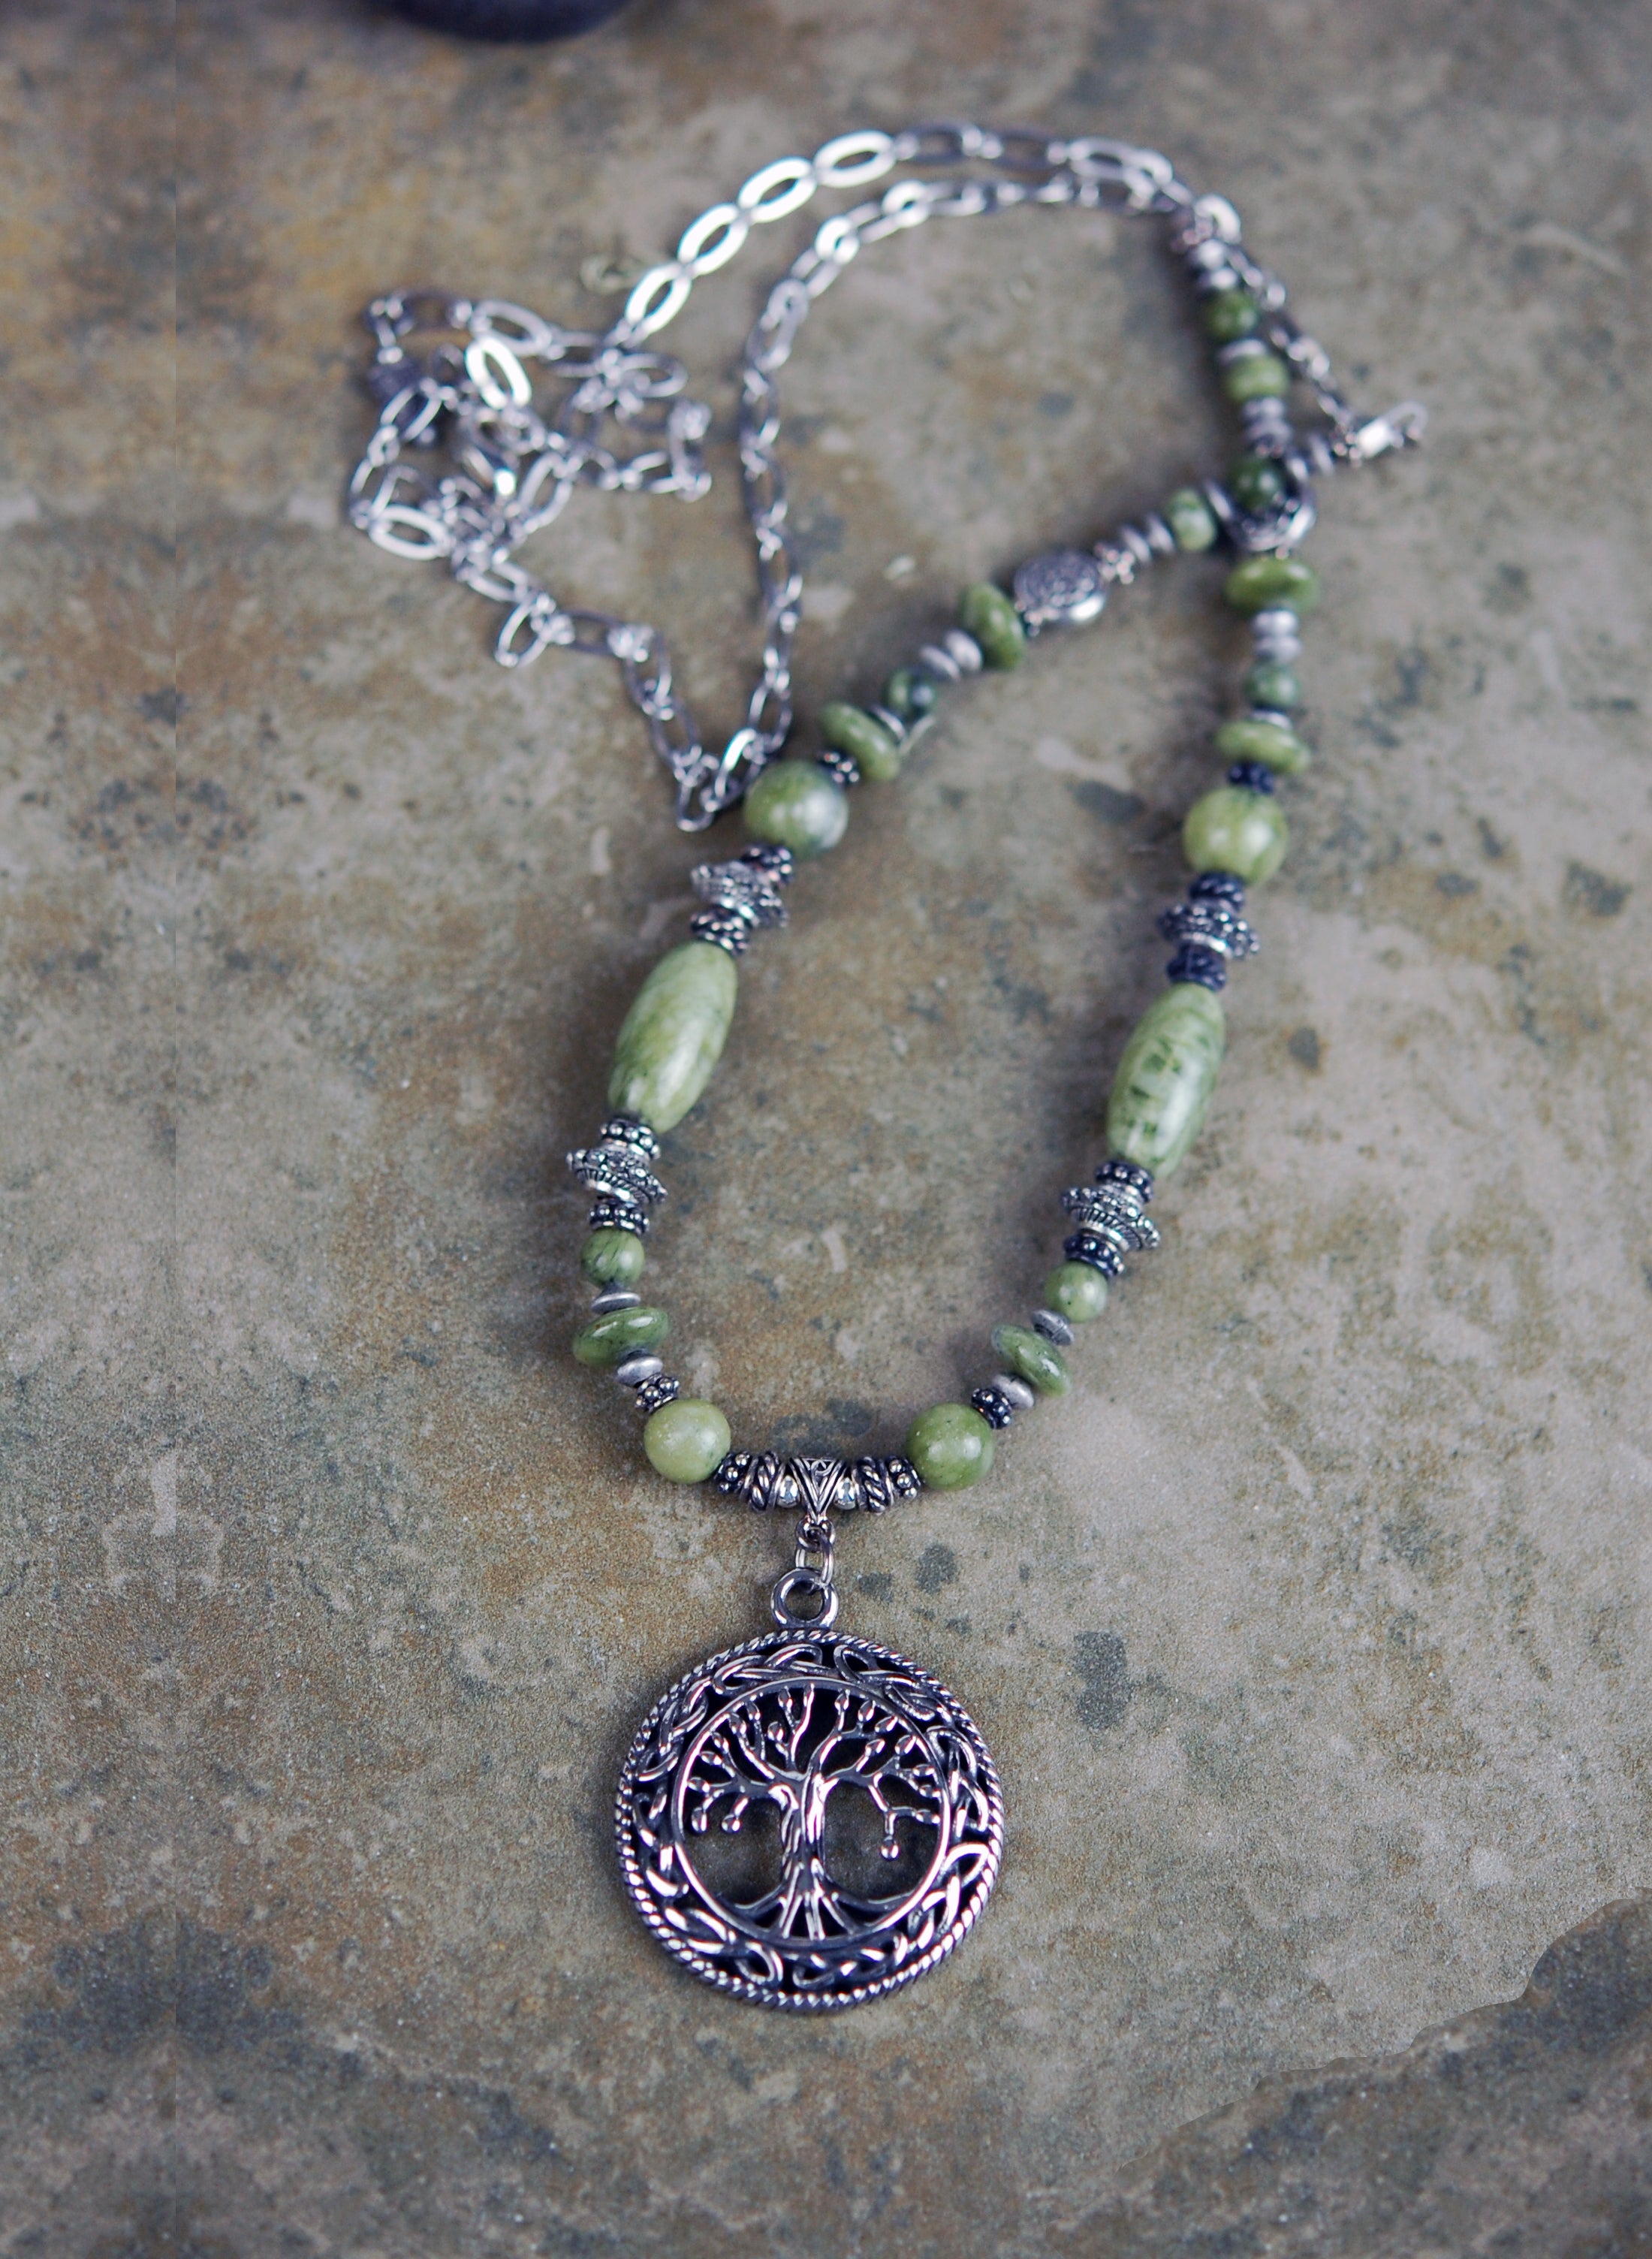 Connemara Marble with Tree of Life Focal